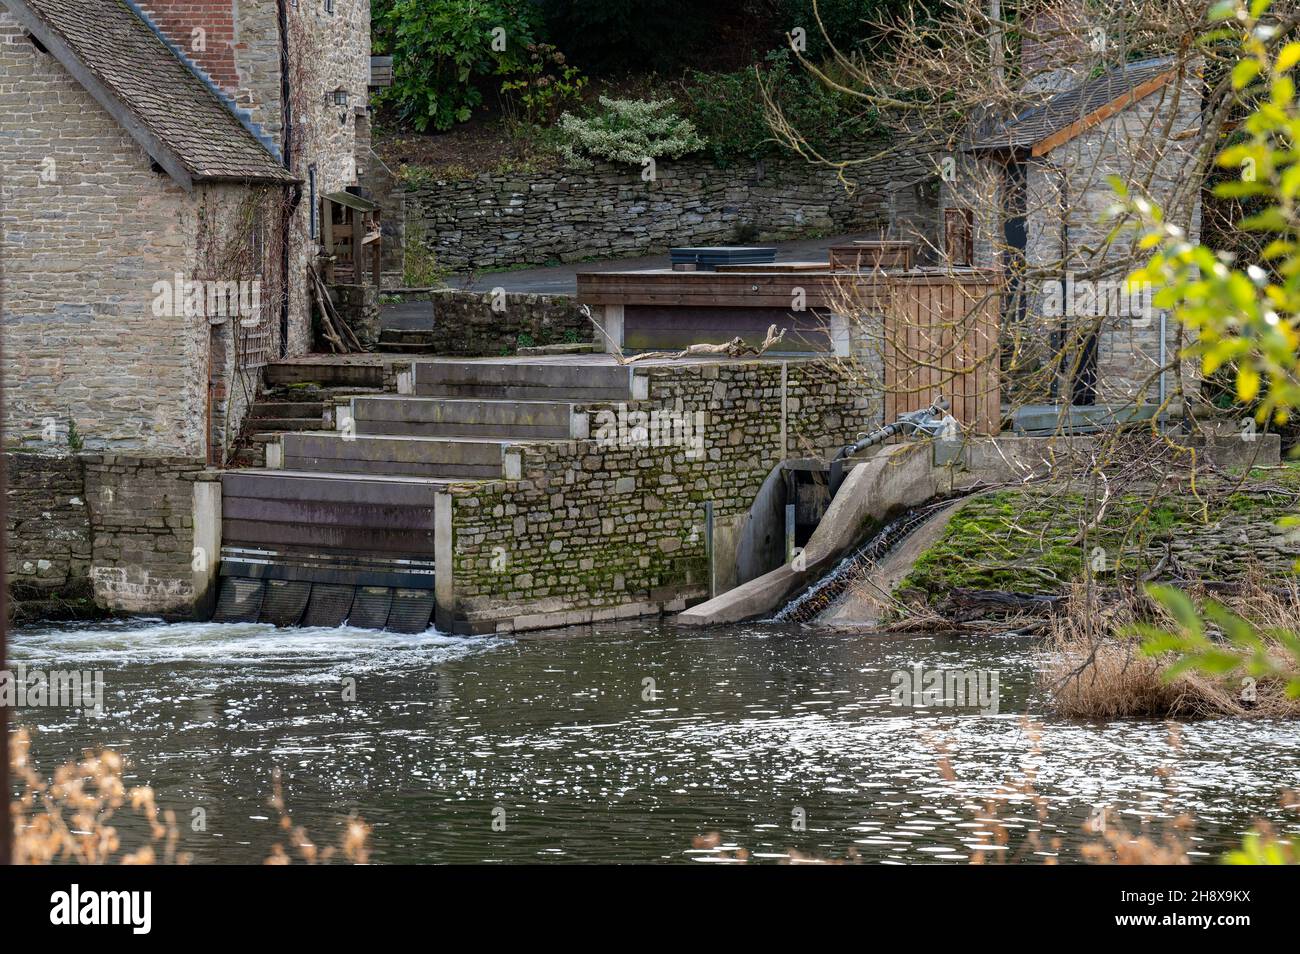 Ludlow Hydro power scheme at Ludford Mill on the River Tame close to the horseshoe weir. Stock Photo